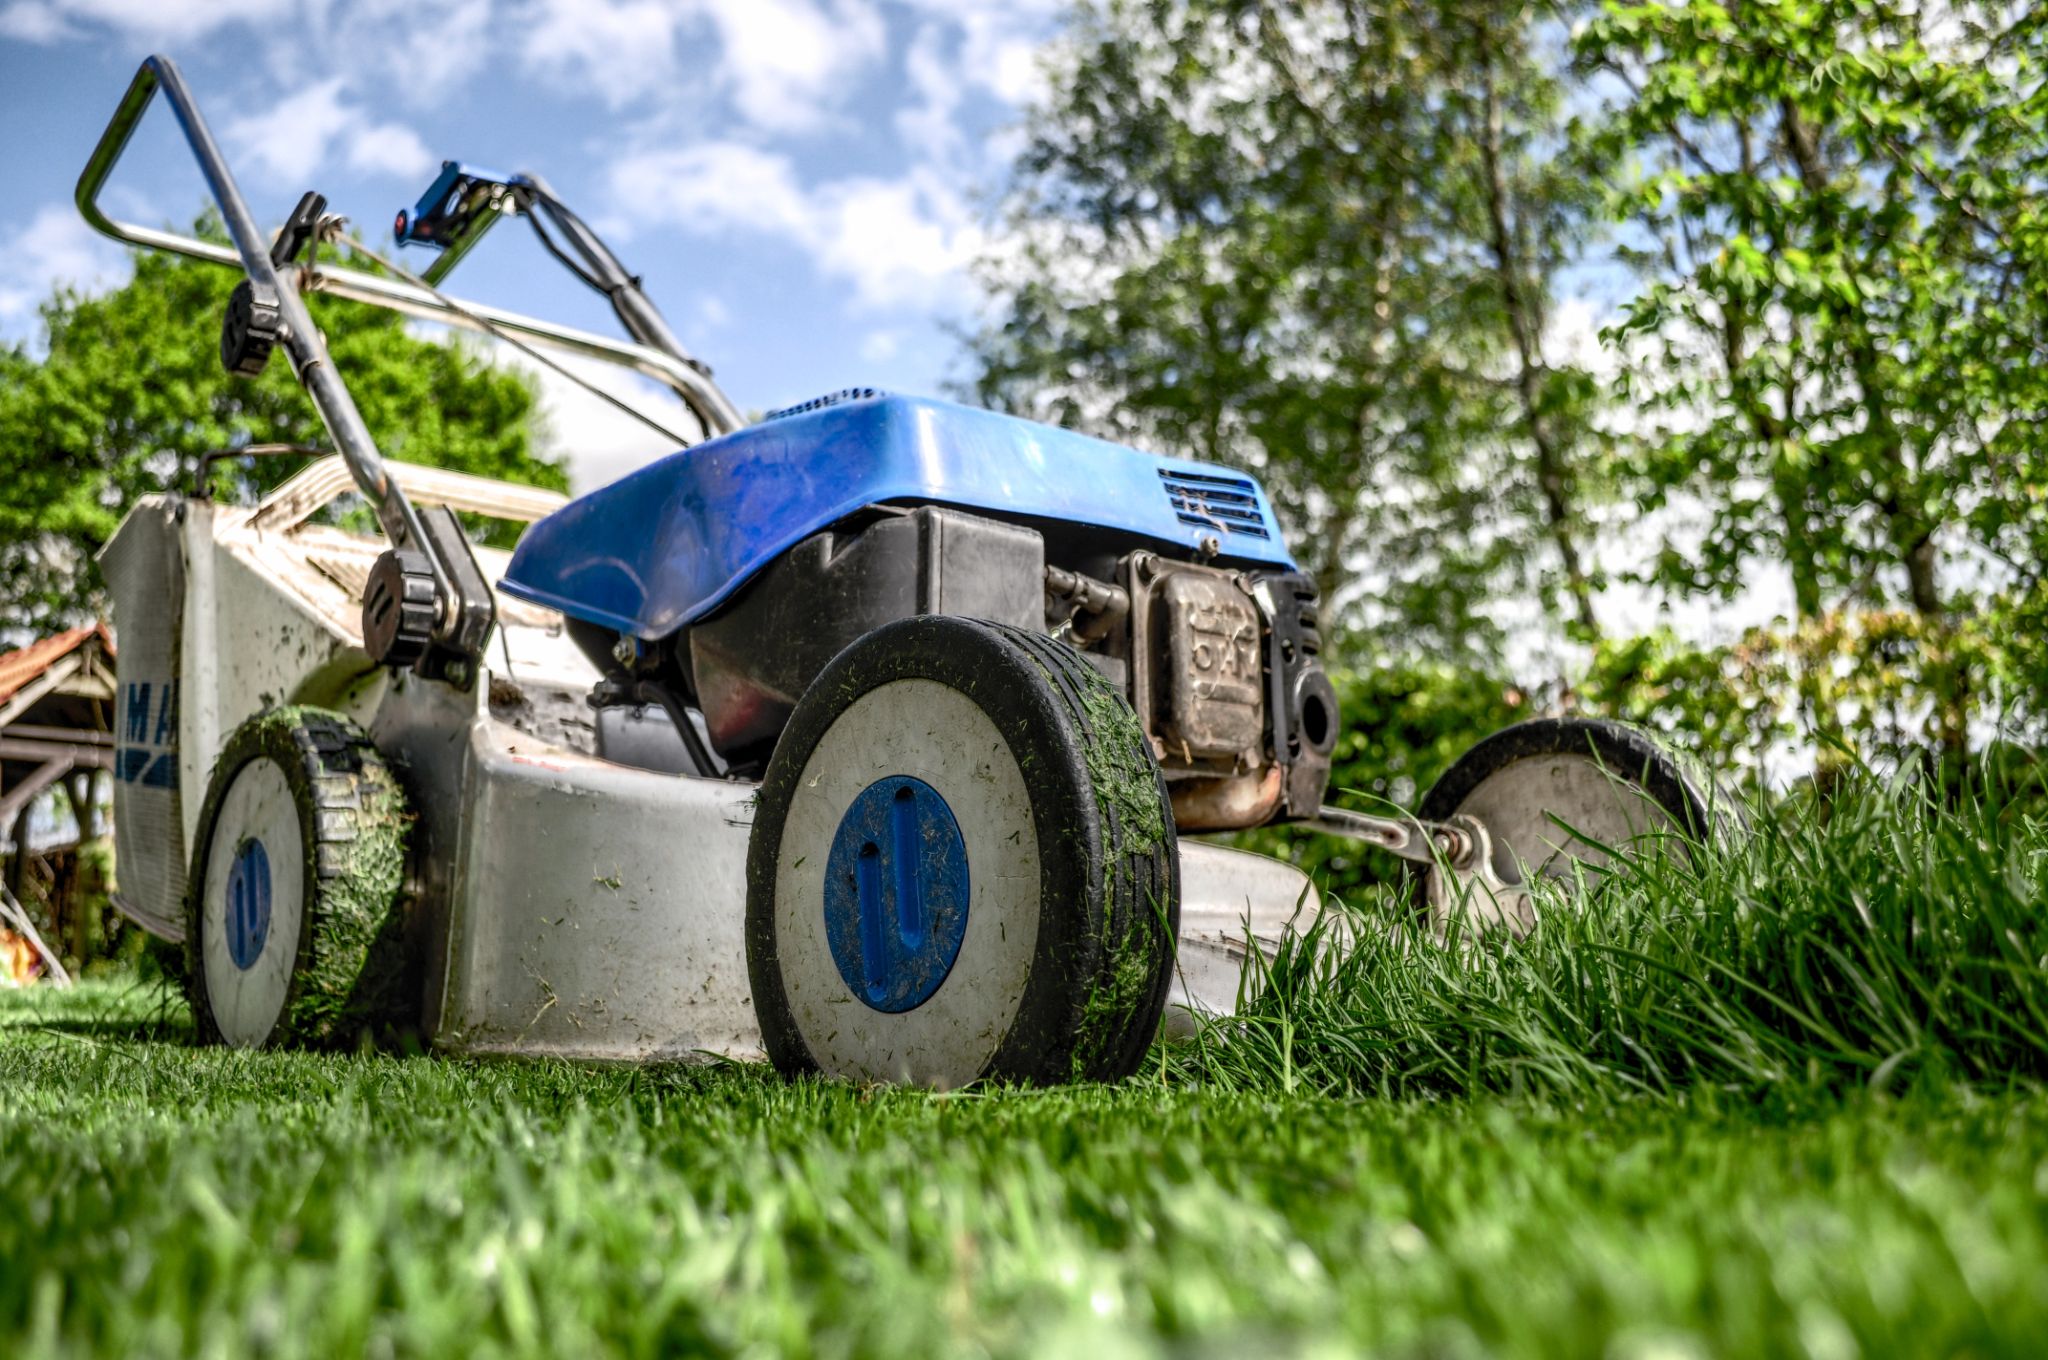 When is a Good Time to Buy a Lawn Mower?